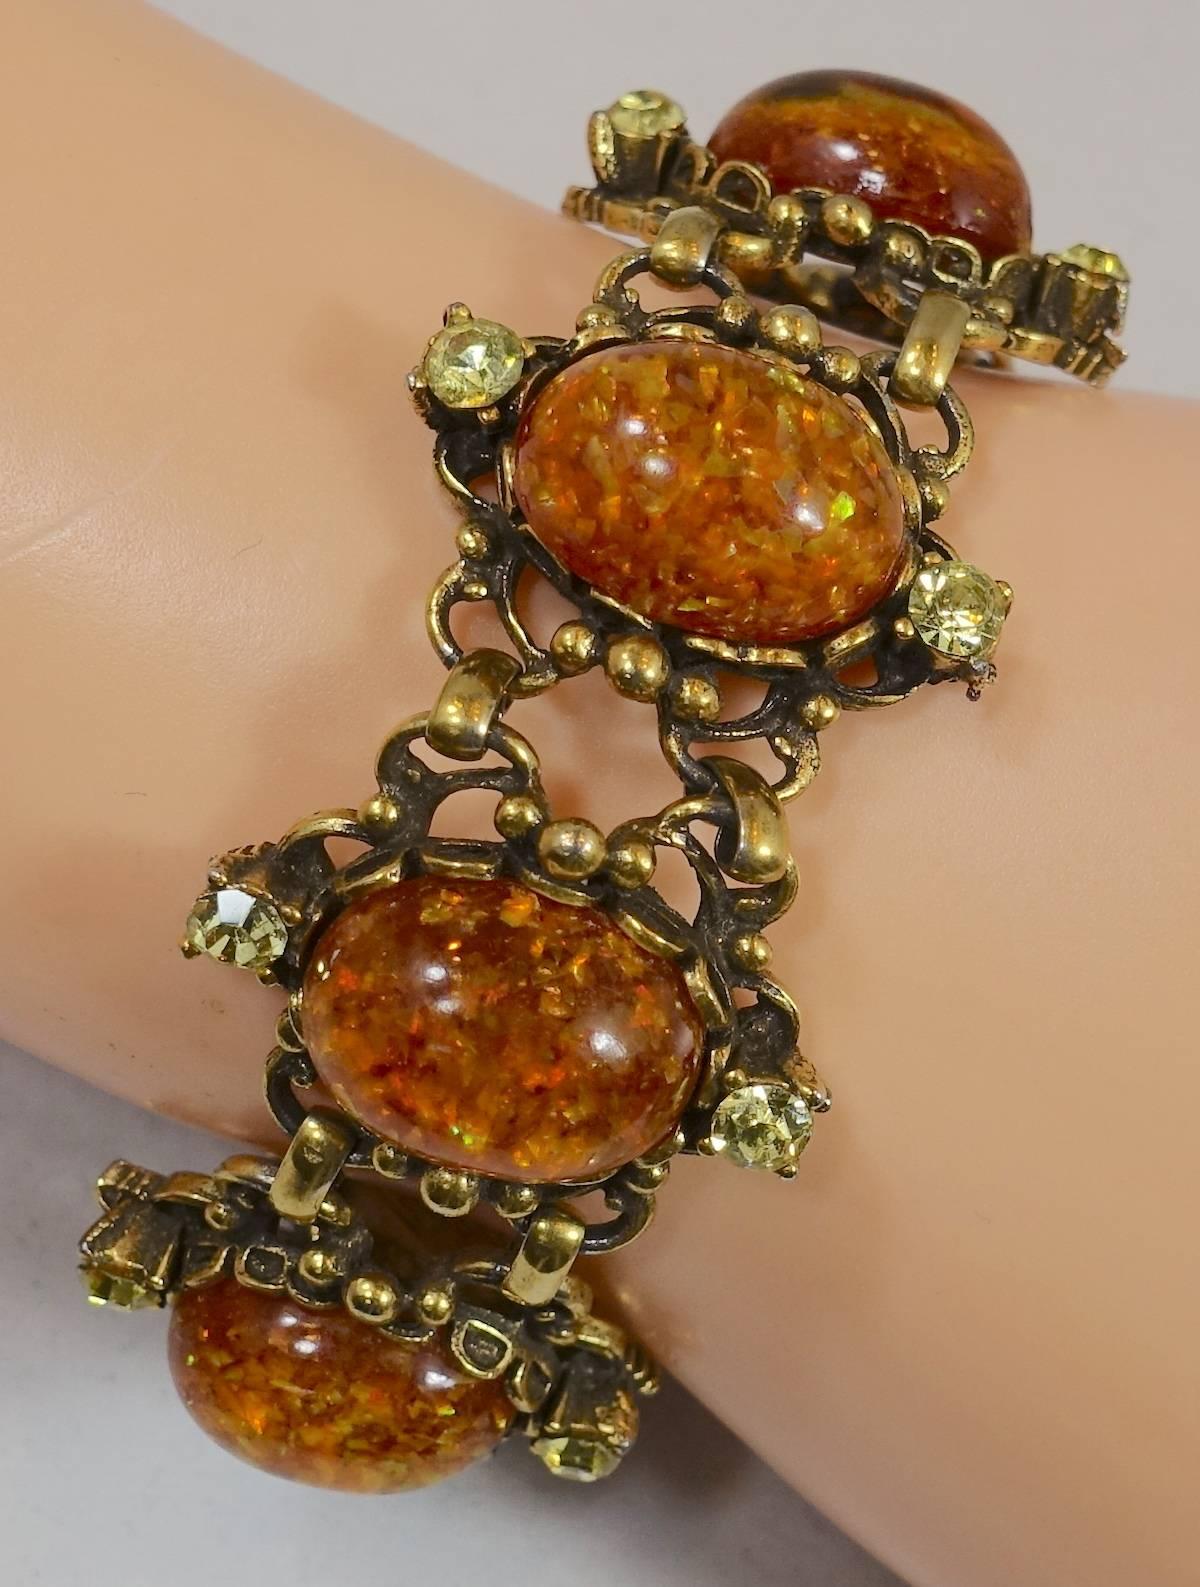 This is a great bracelet by Coro.  It has opaline stones with citrine glass cabochon stones. Each stone has a round yellow crystal on top and the bottom. It has a fold over clasp and is designed in an open work gold tone setting. It measures 7” x